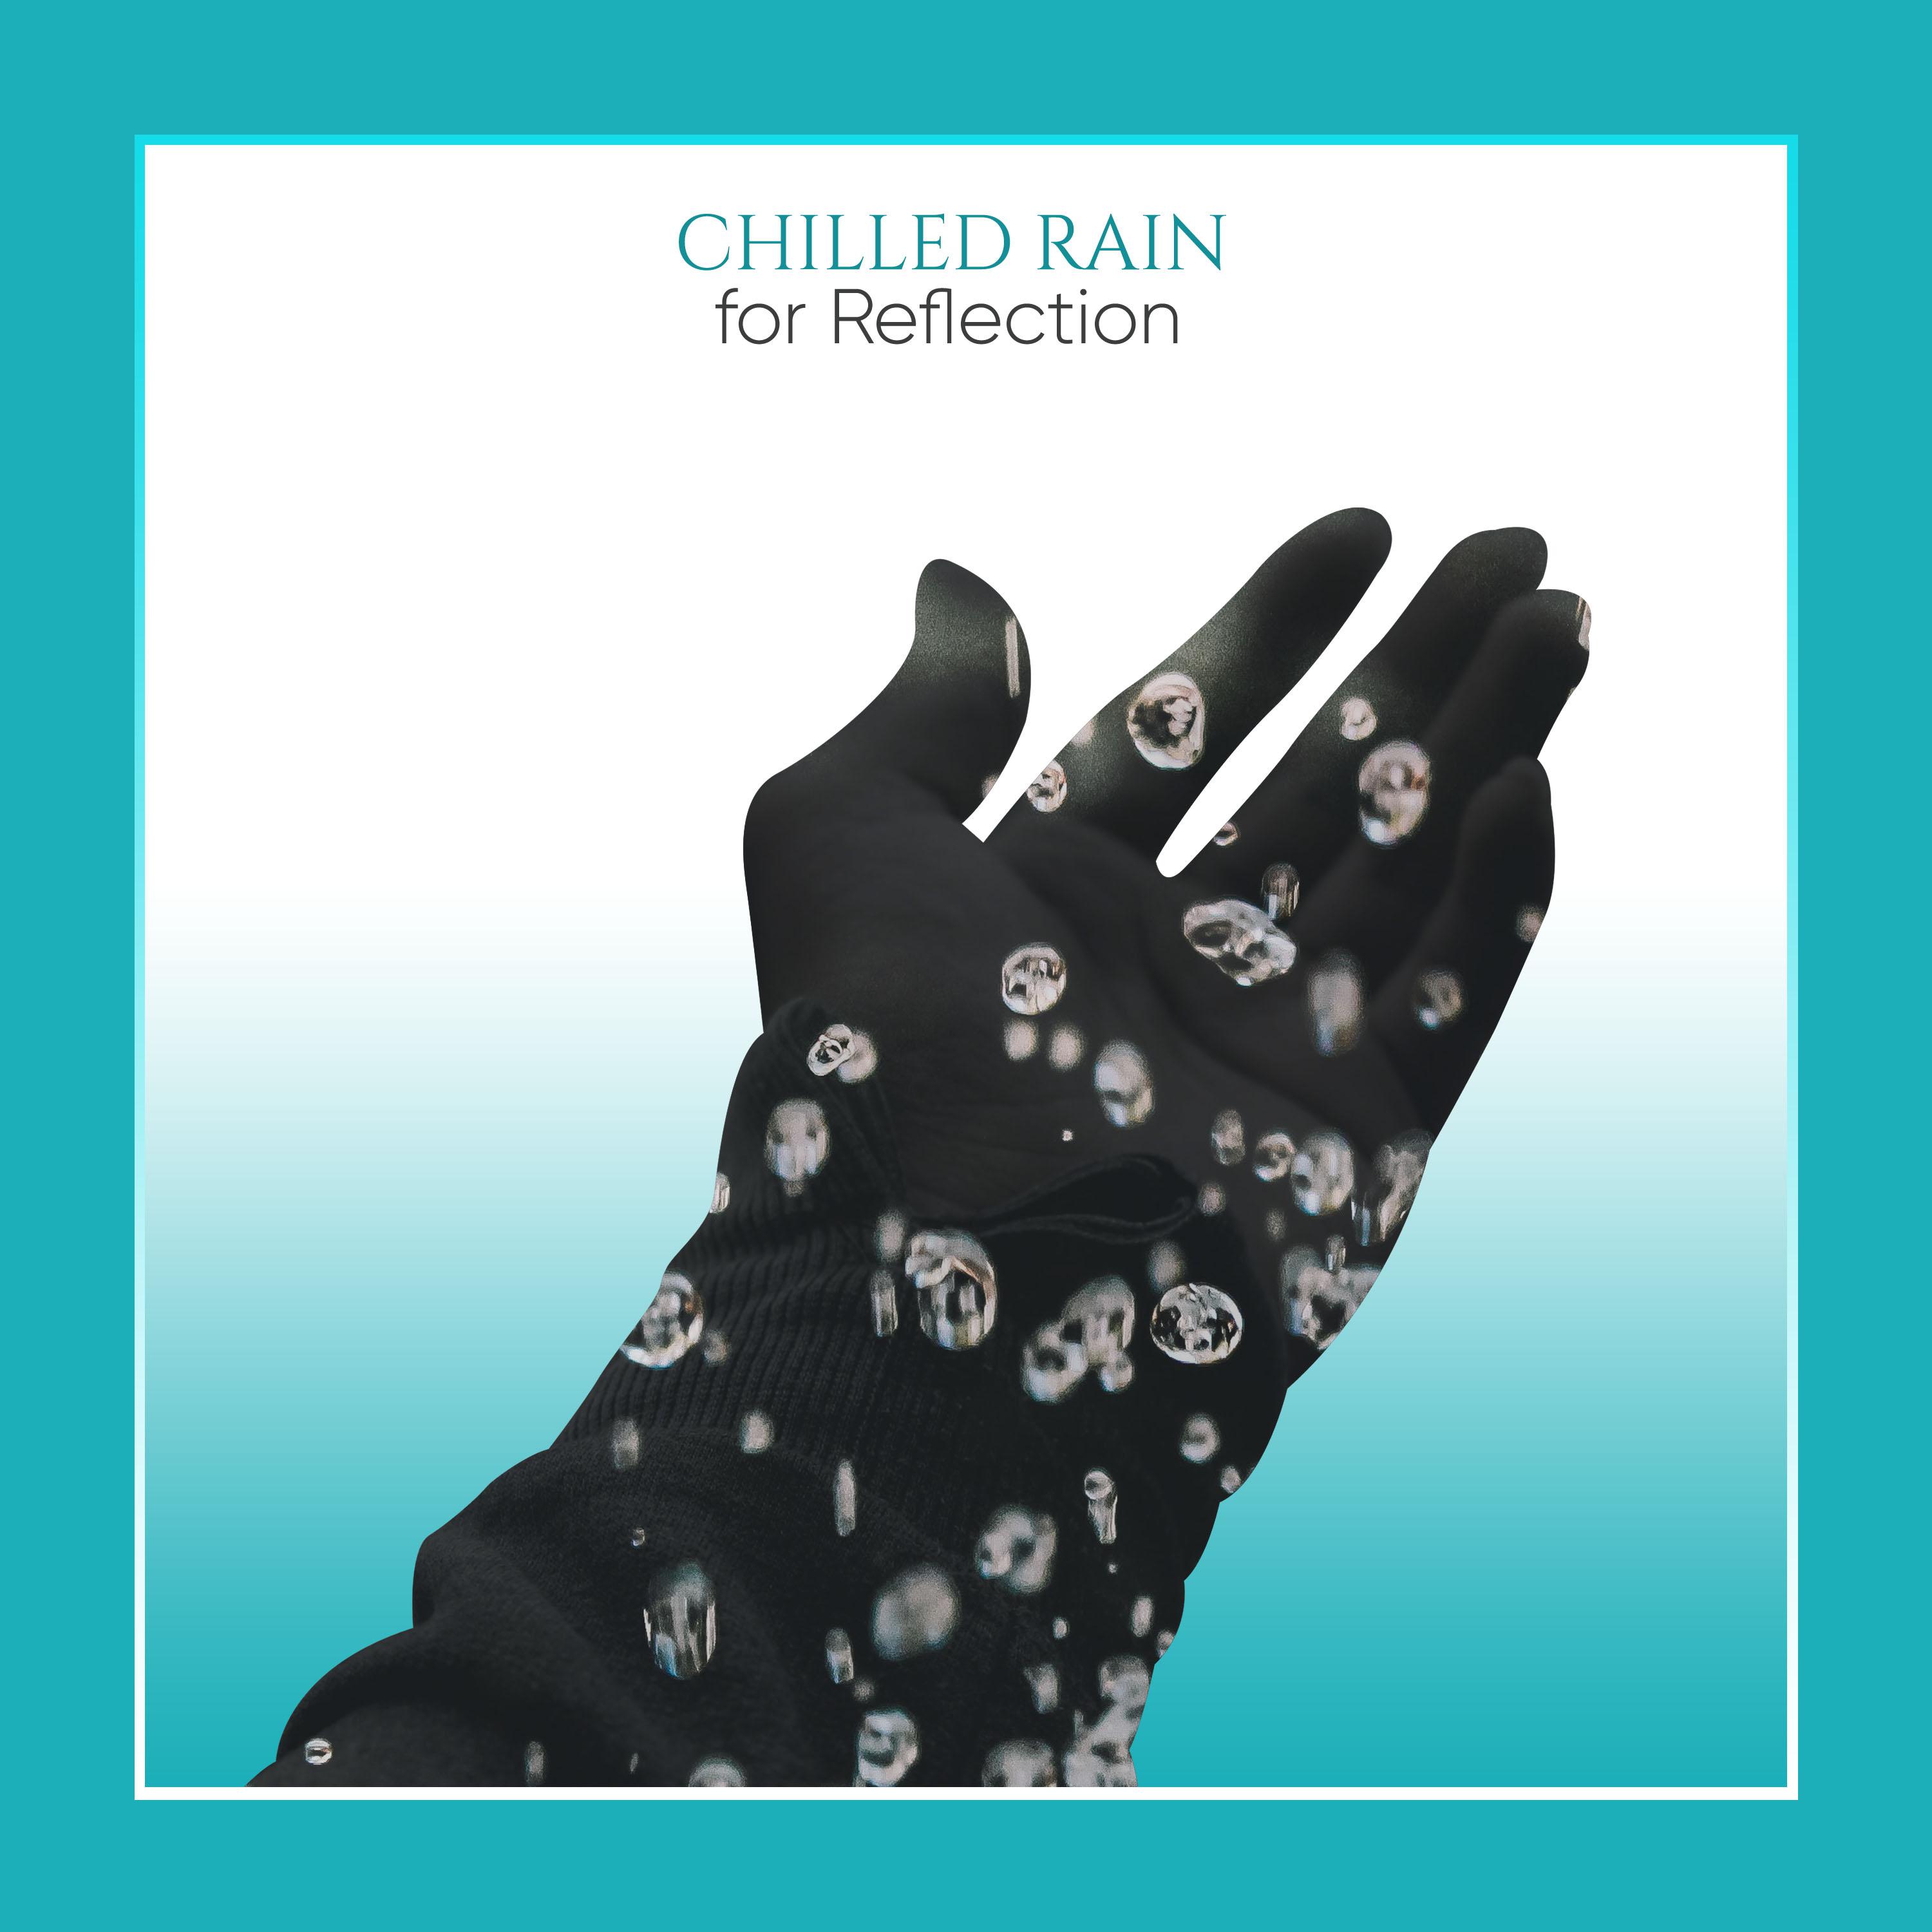 12 Chilled Rain Storms for Study & Reflection